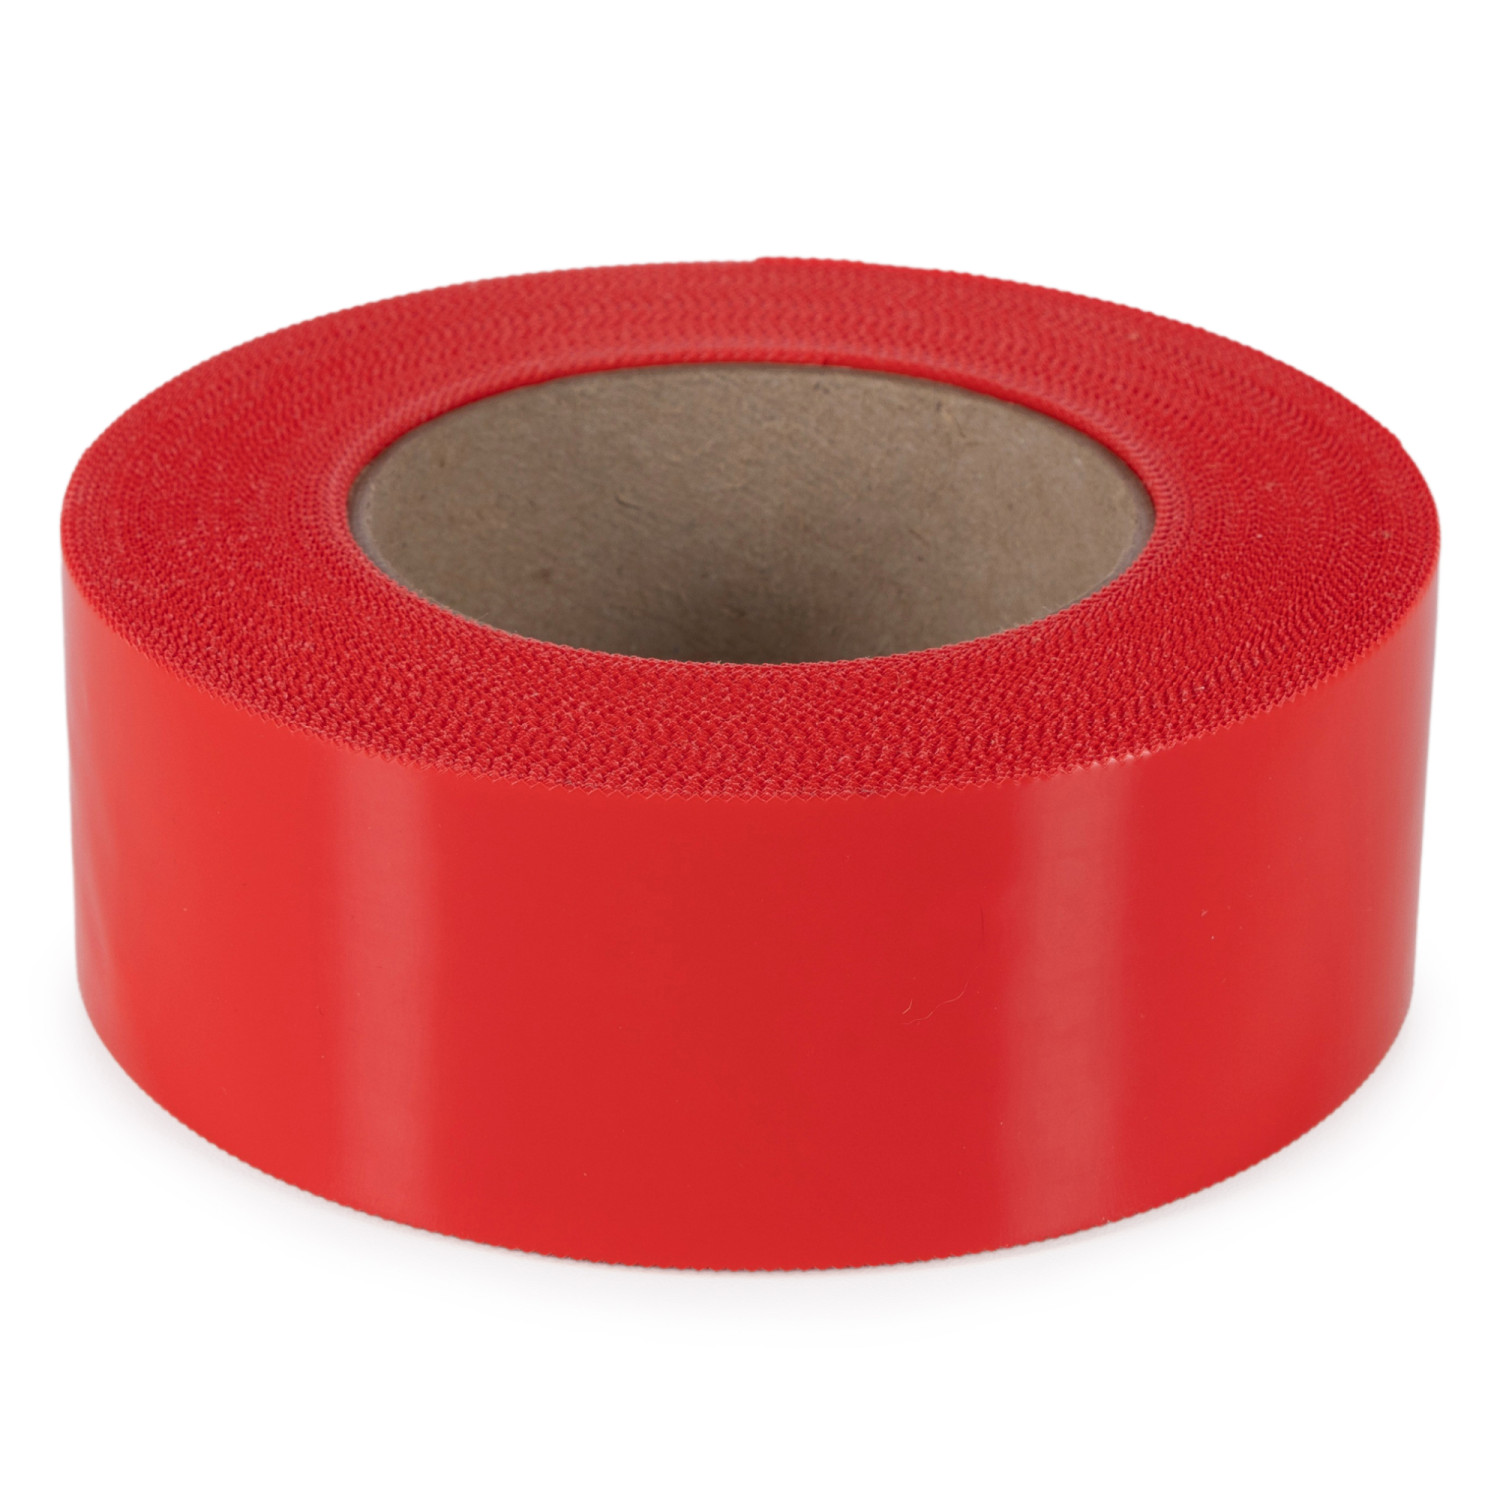 2 in. x 180 ft. 30 Day UV-Resistant Stucco Masking Tape - Case of